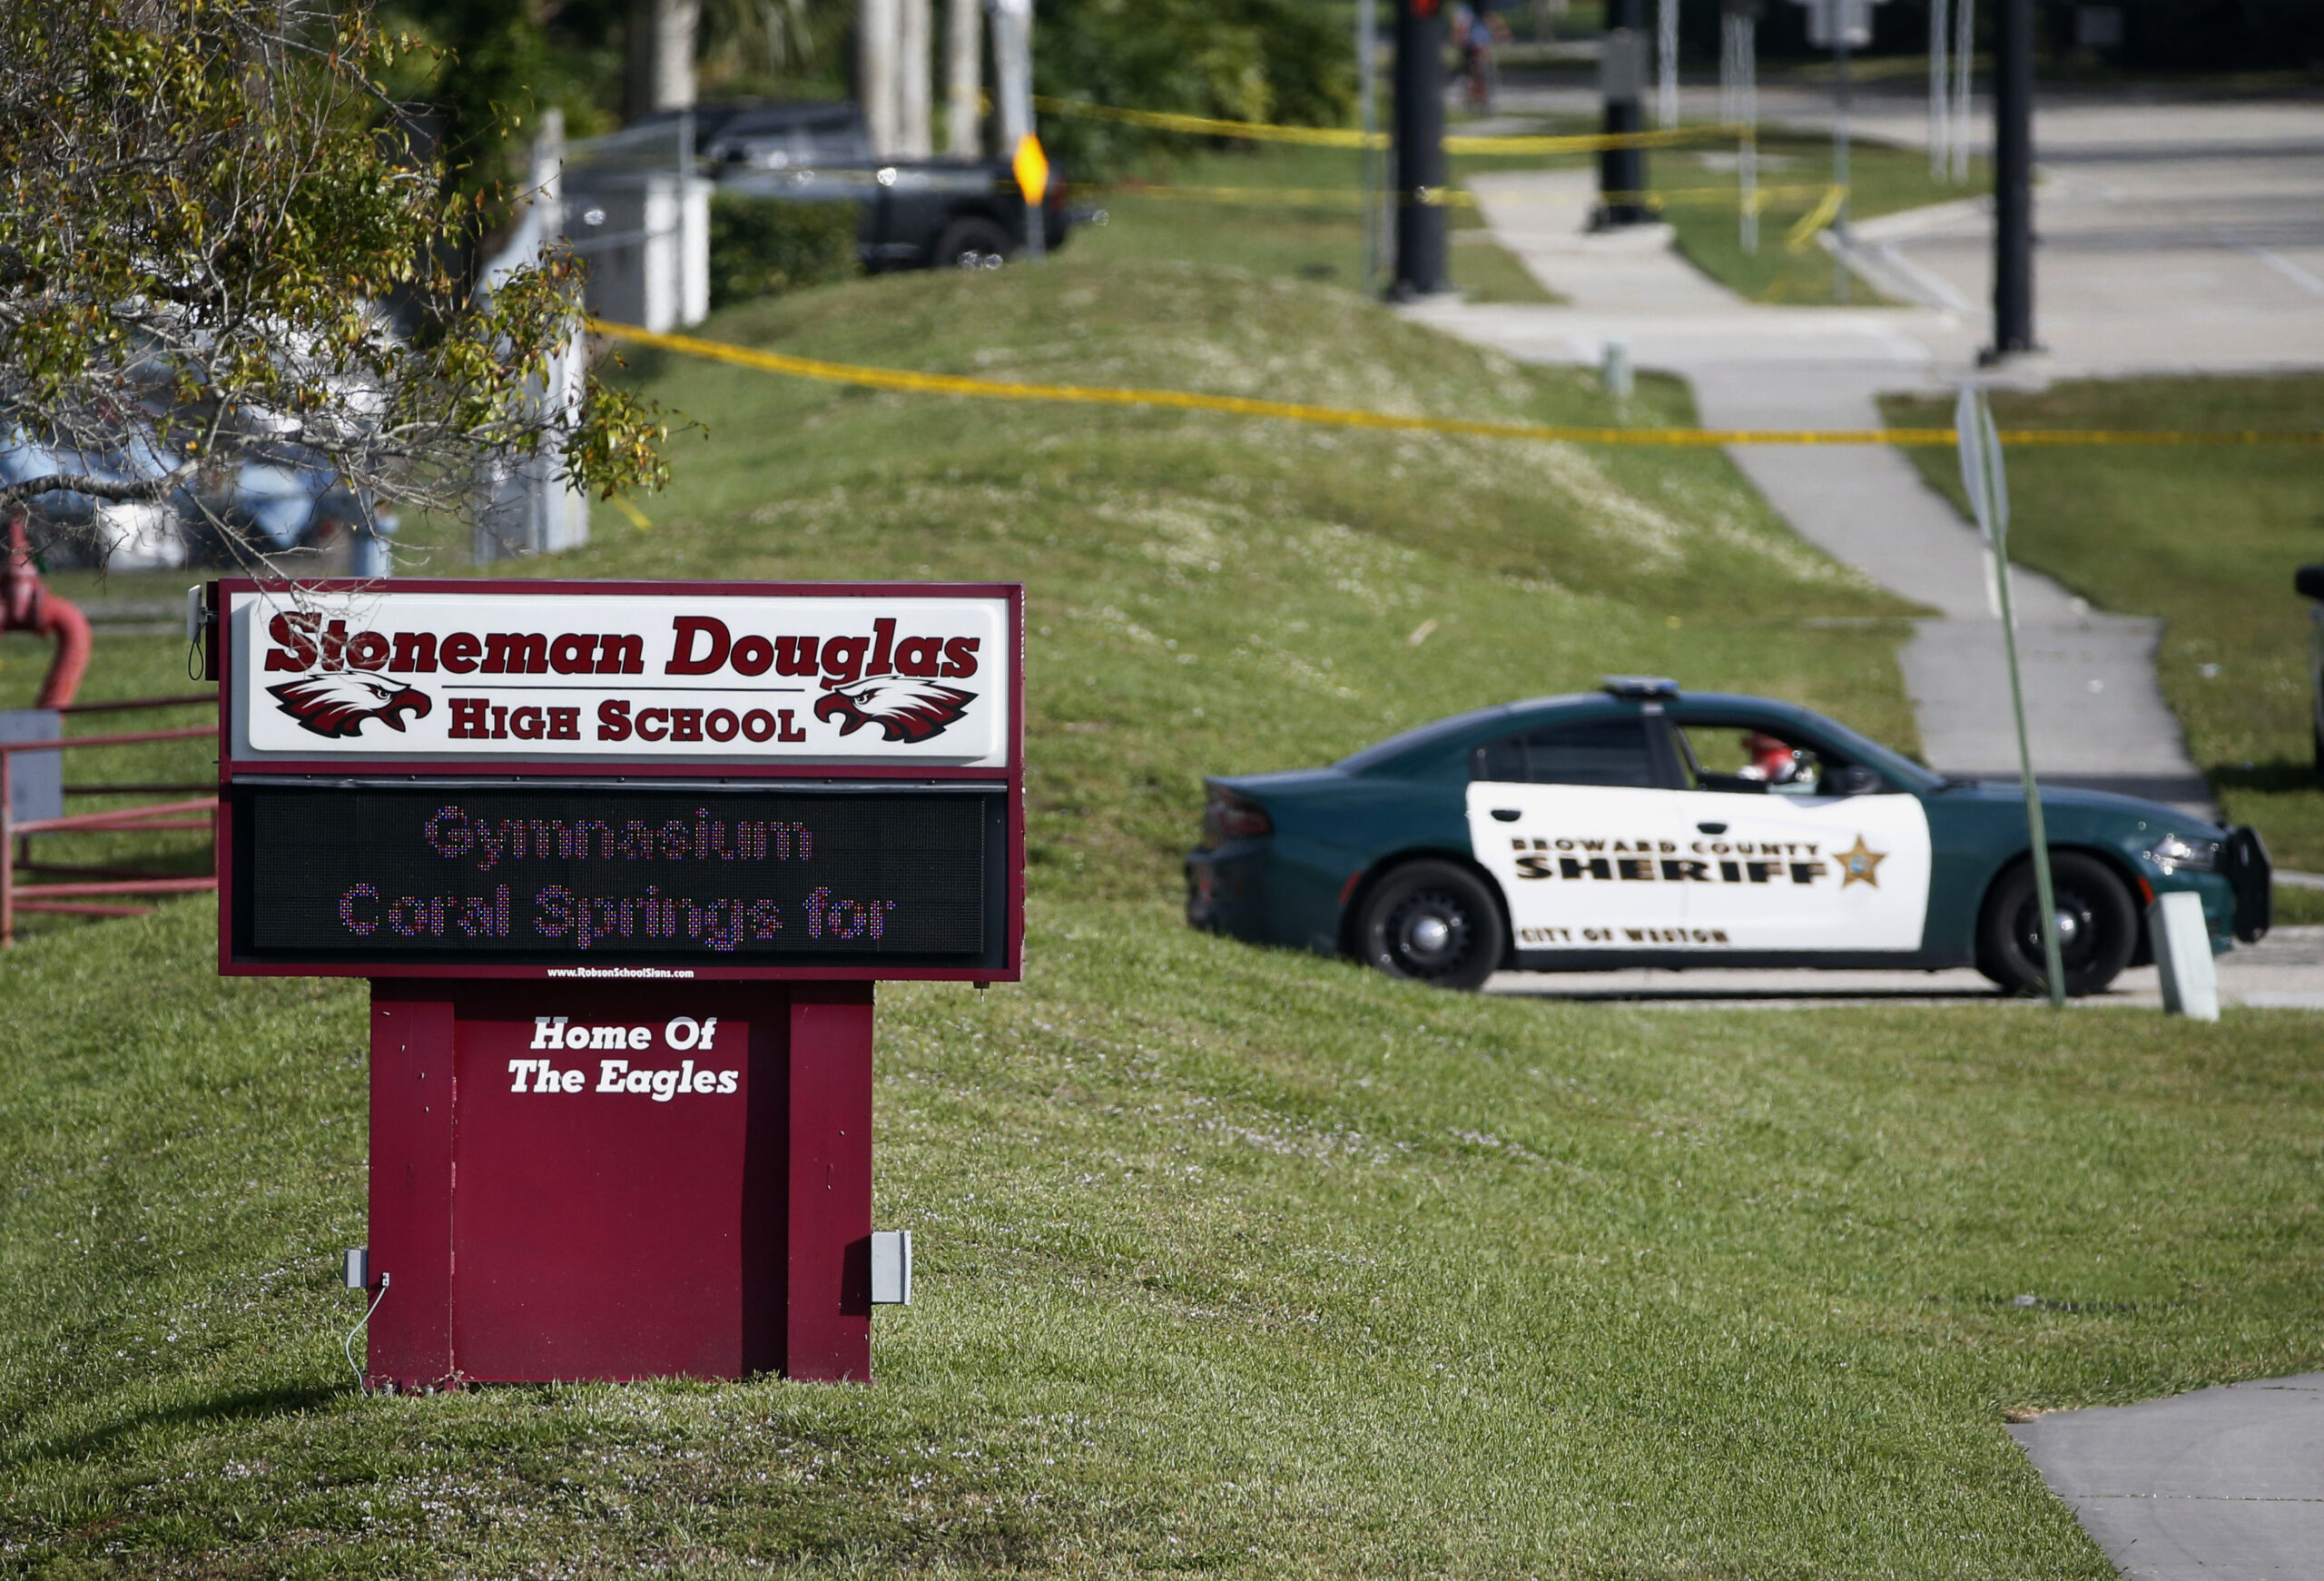 FILE- Law enforcement officers block off the entrance to Marjory Stoneman Douglas High School Feb. 15, 2018 in Parkland, Fla., following a deadly shooting at the school. The families of most of those killed in the 2018 Florida high school massacre have settled their lawsuit against the federal government. Sixteen of the 17 killed at Marjory Stoneman Douglas High in Parkland had sued over the FBI’s failure to stop the gunman even though it had received information he intended to attack. The settlement reached Monday, Nov. 22, 2021 is confidential. (AP Photo/Wilfredo Lee, File)